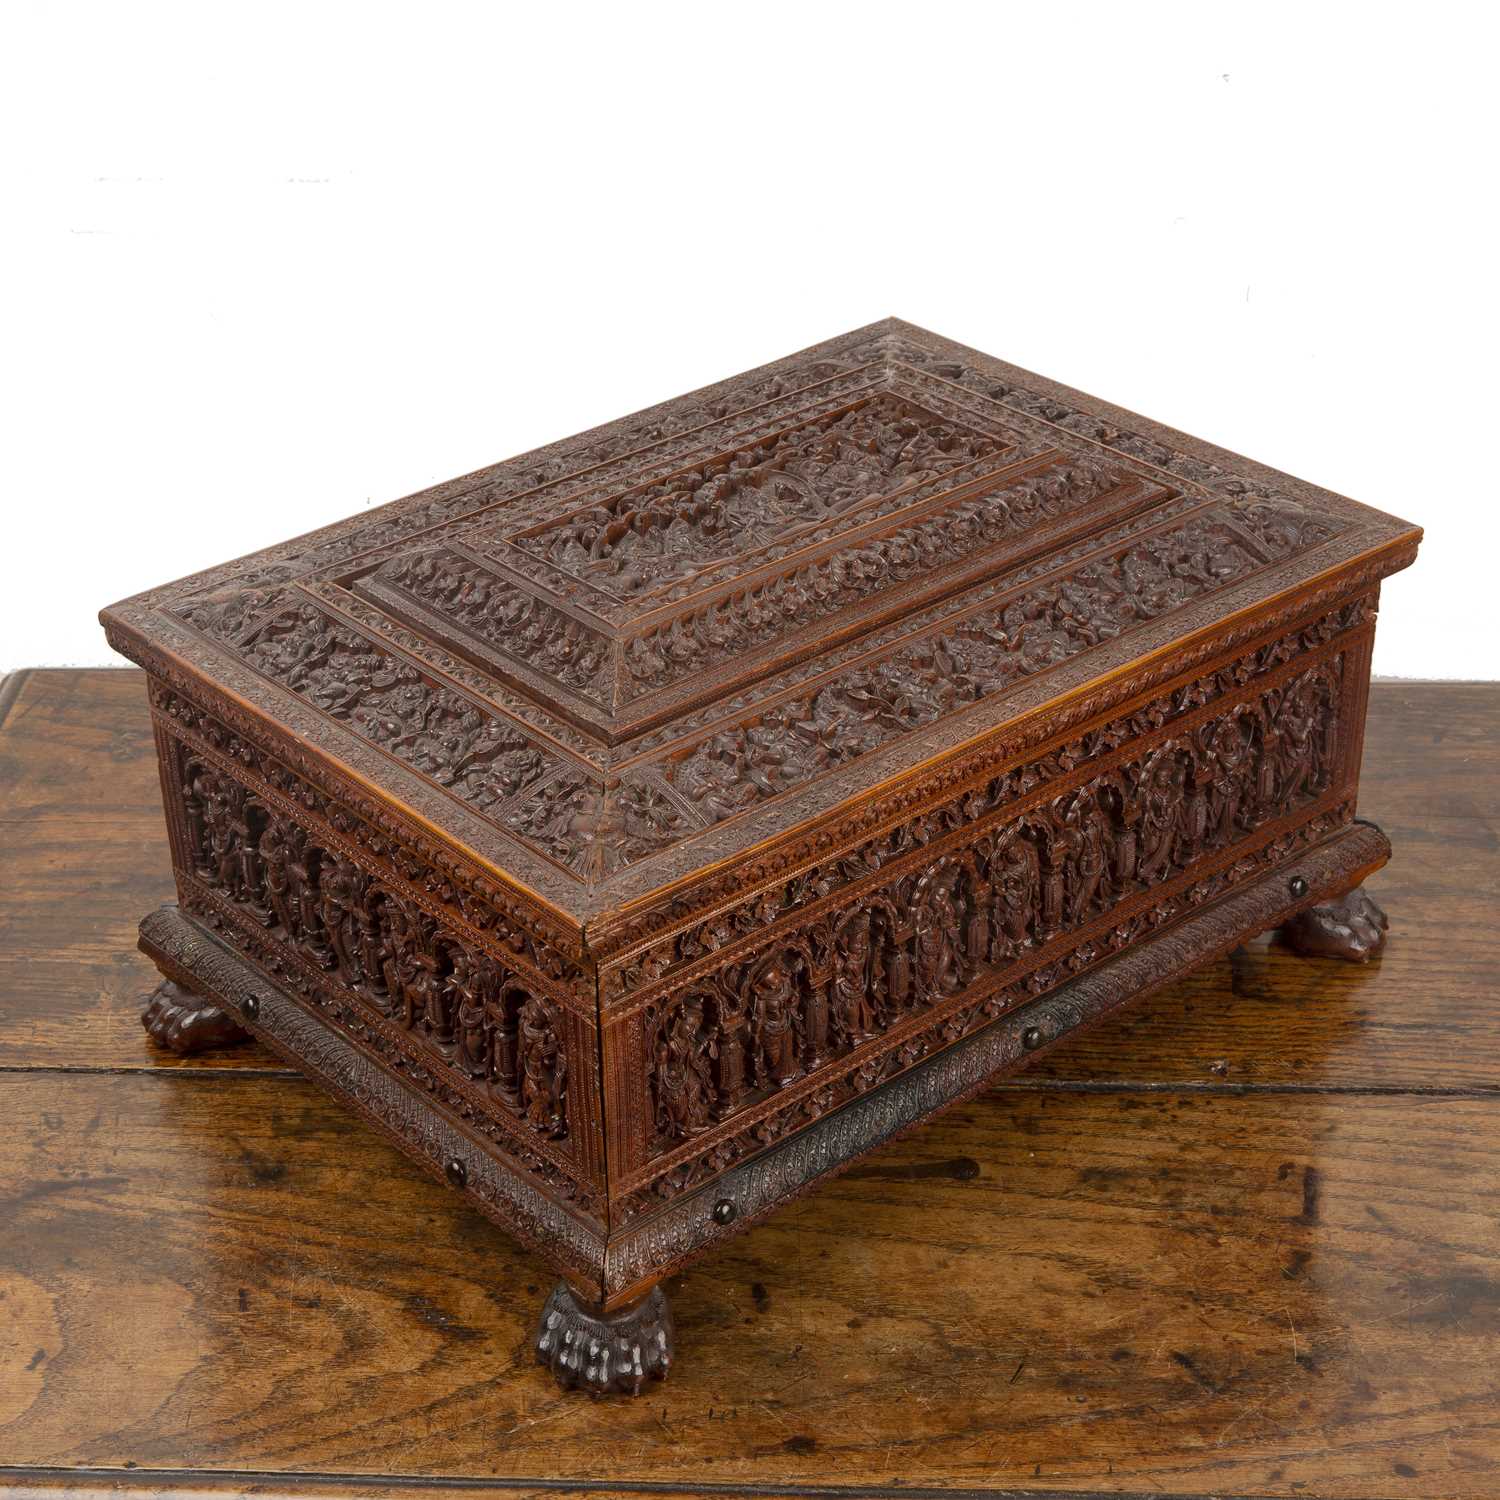 Sandalwood jewel box Indian, late 19th/20th Century, with extensive carved decoration throughout and - Image 2 of 7